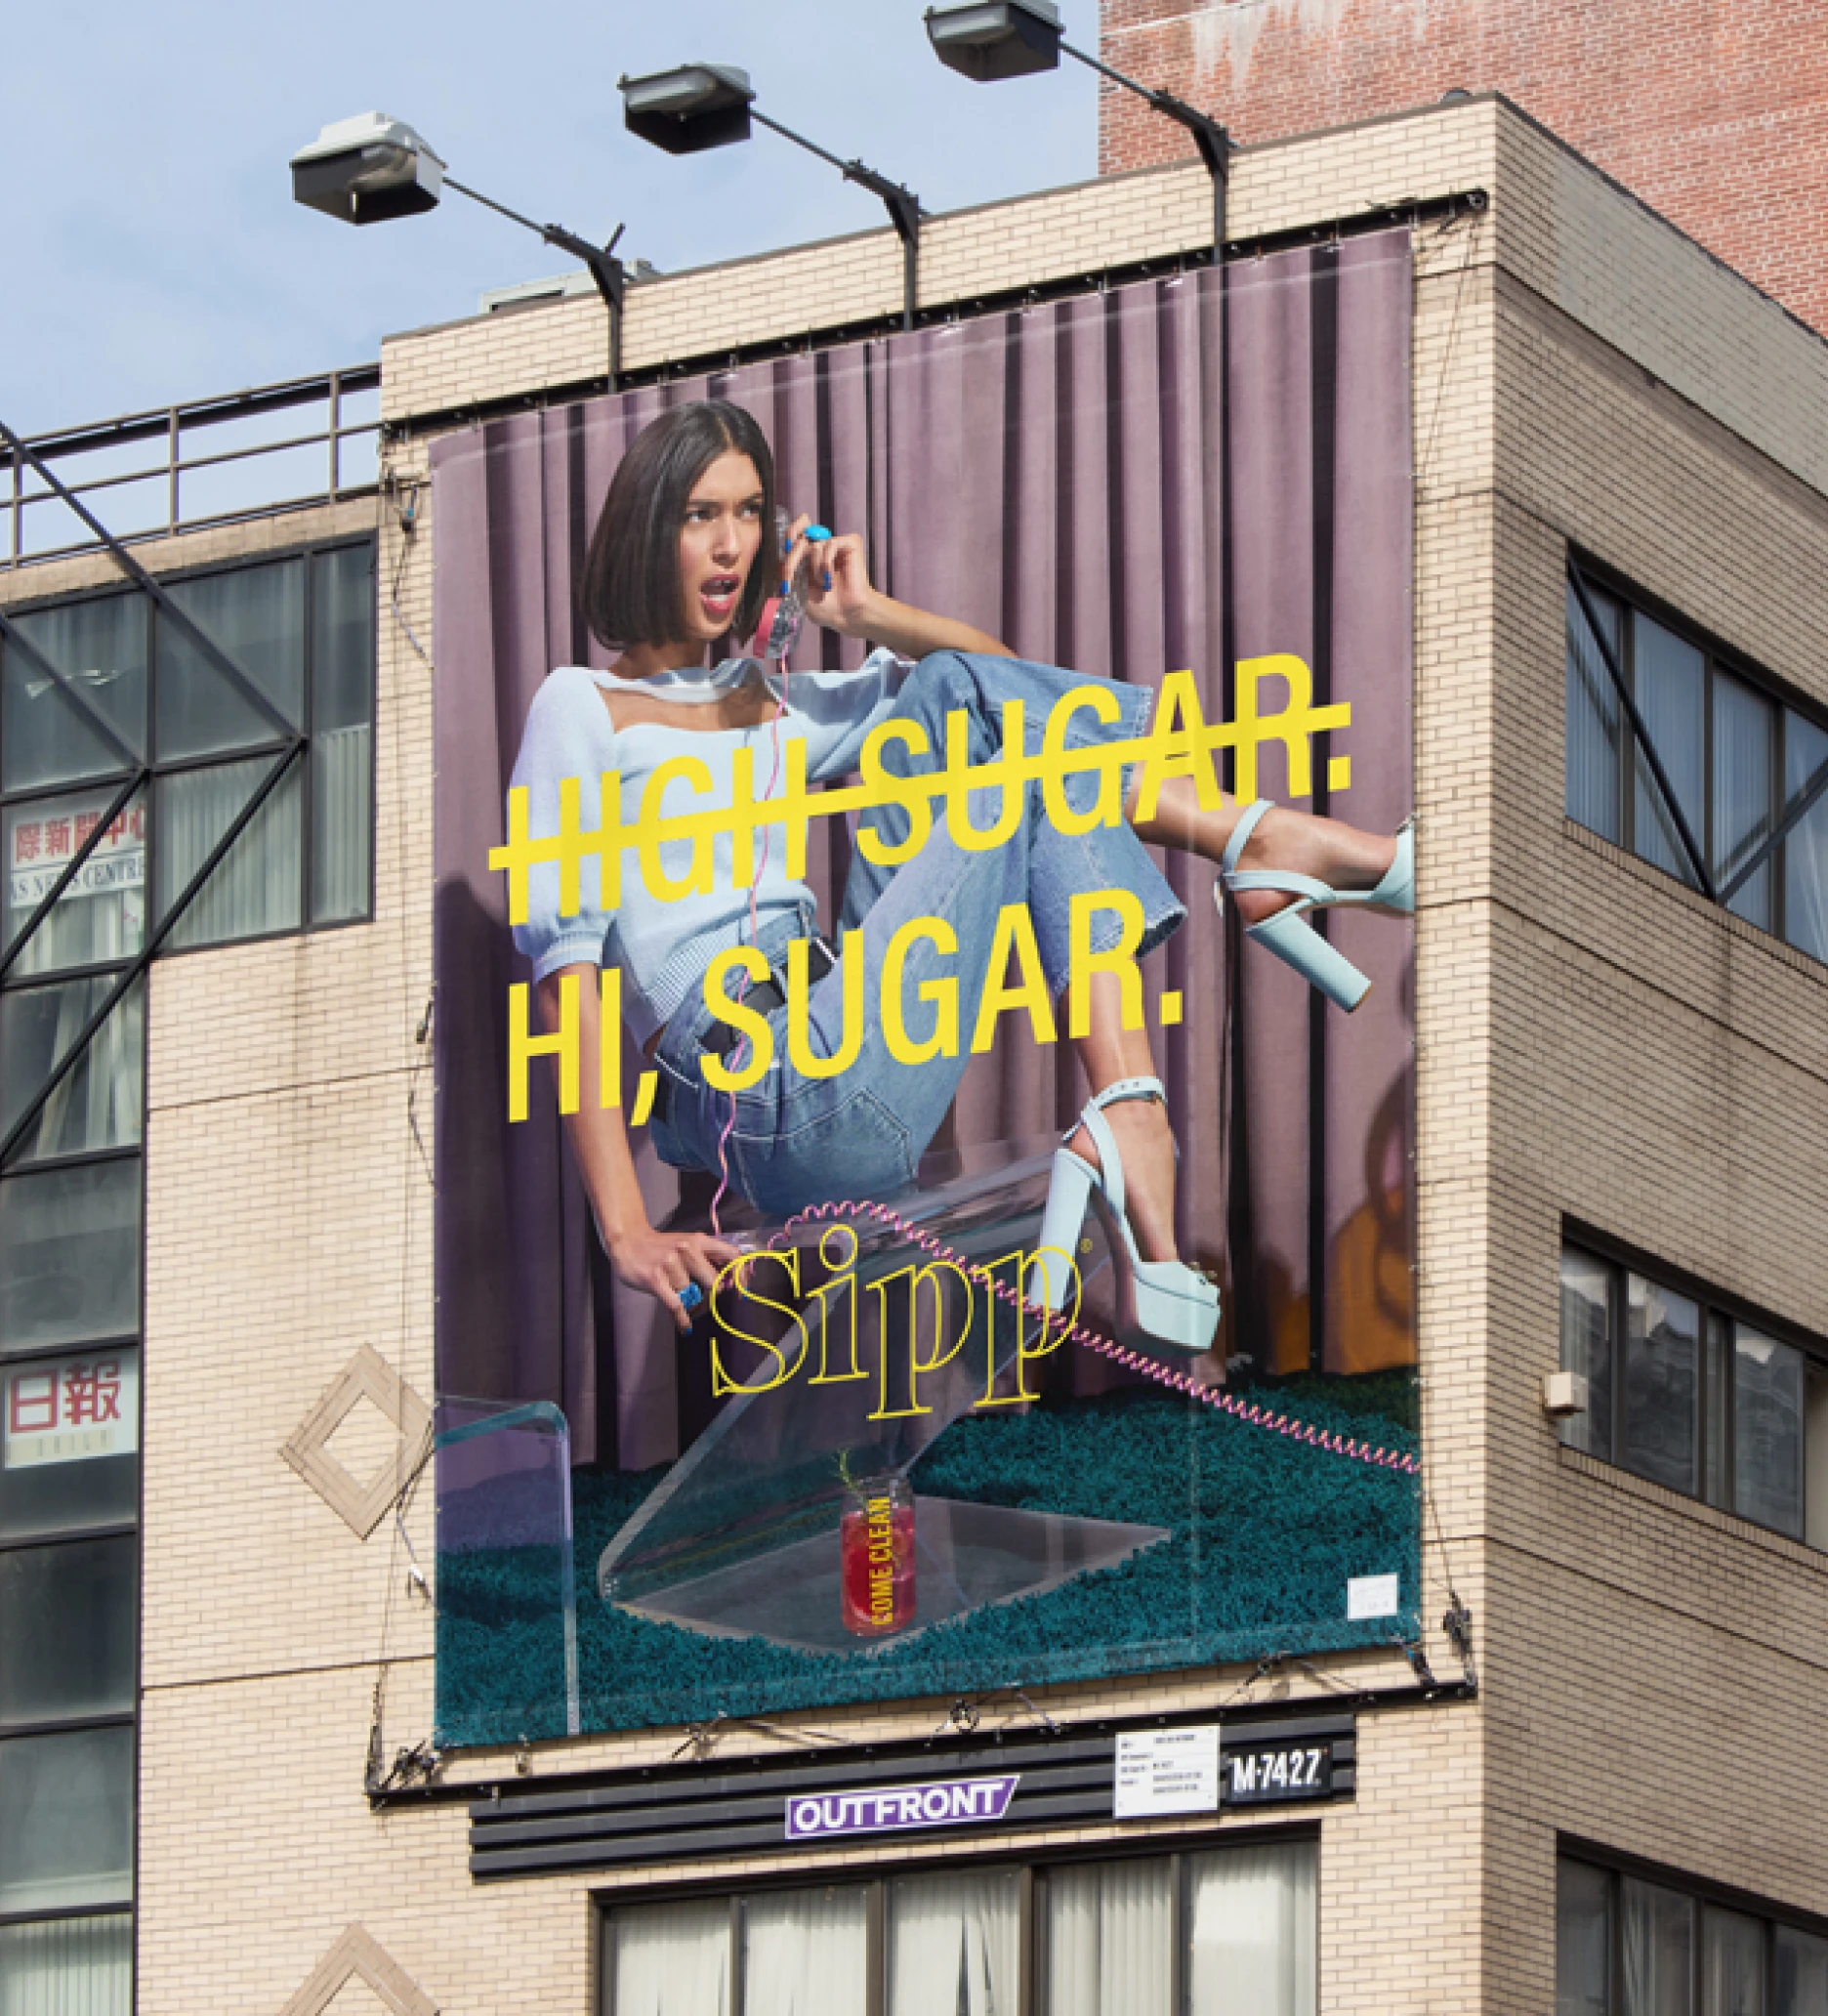 Sipp out-of-home advertising poster design billboard